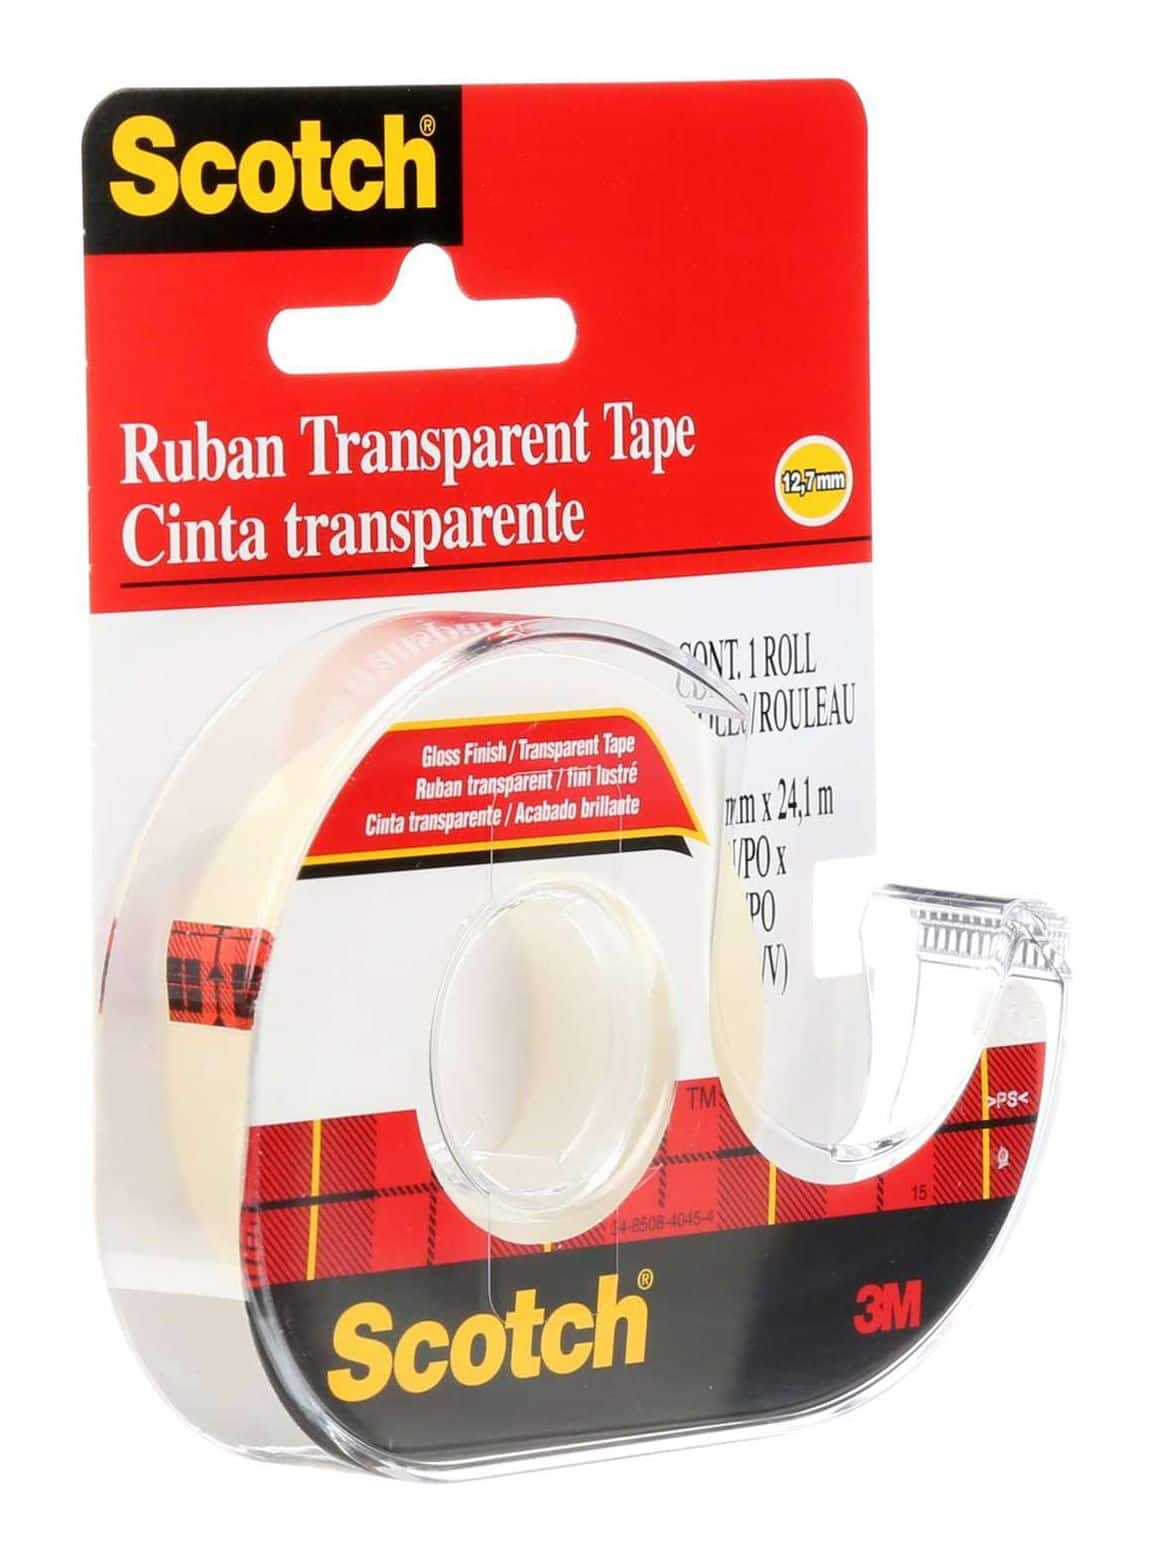 Grand & Toy Premium Packaging Tape, Clear, 48 mm x 50 m, 6/PK